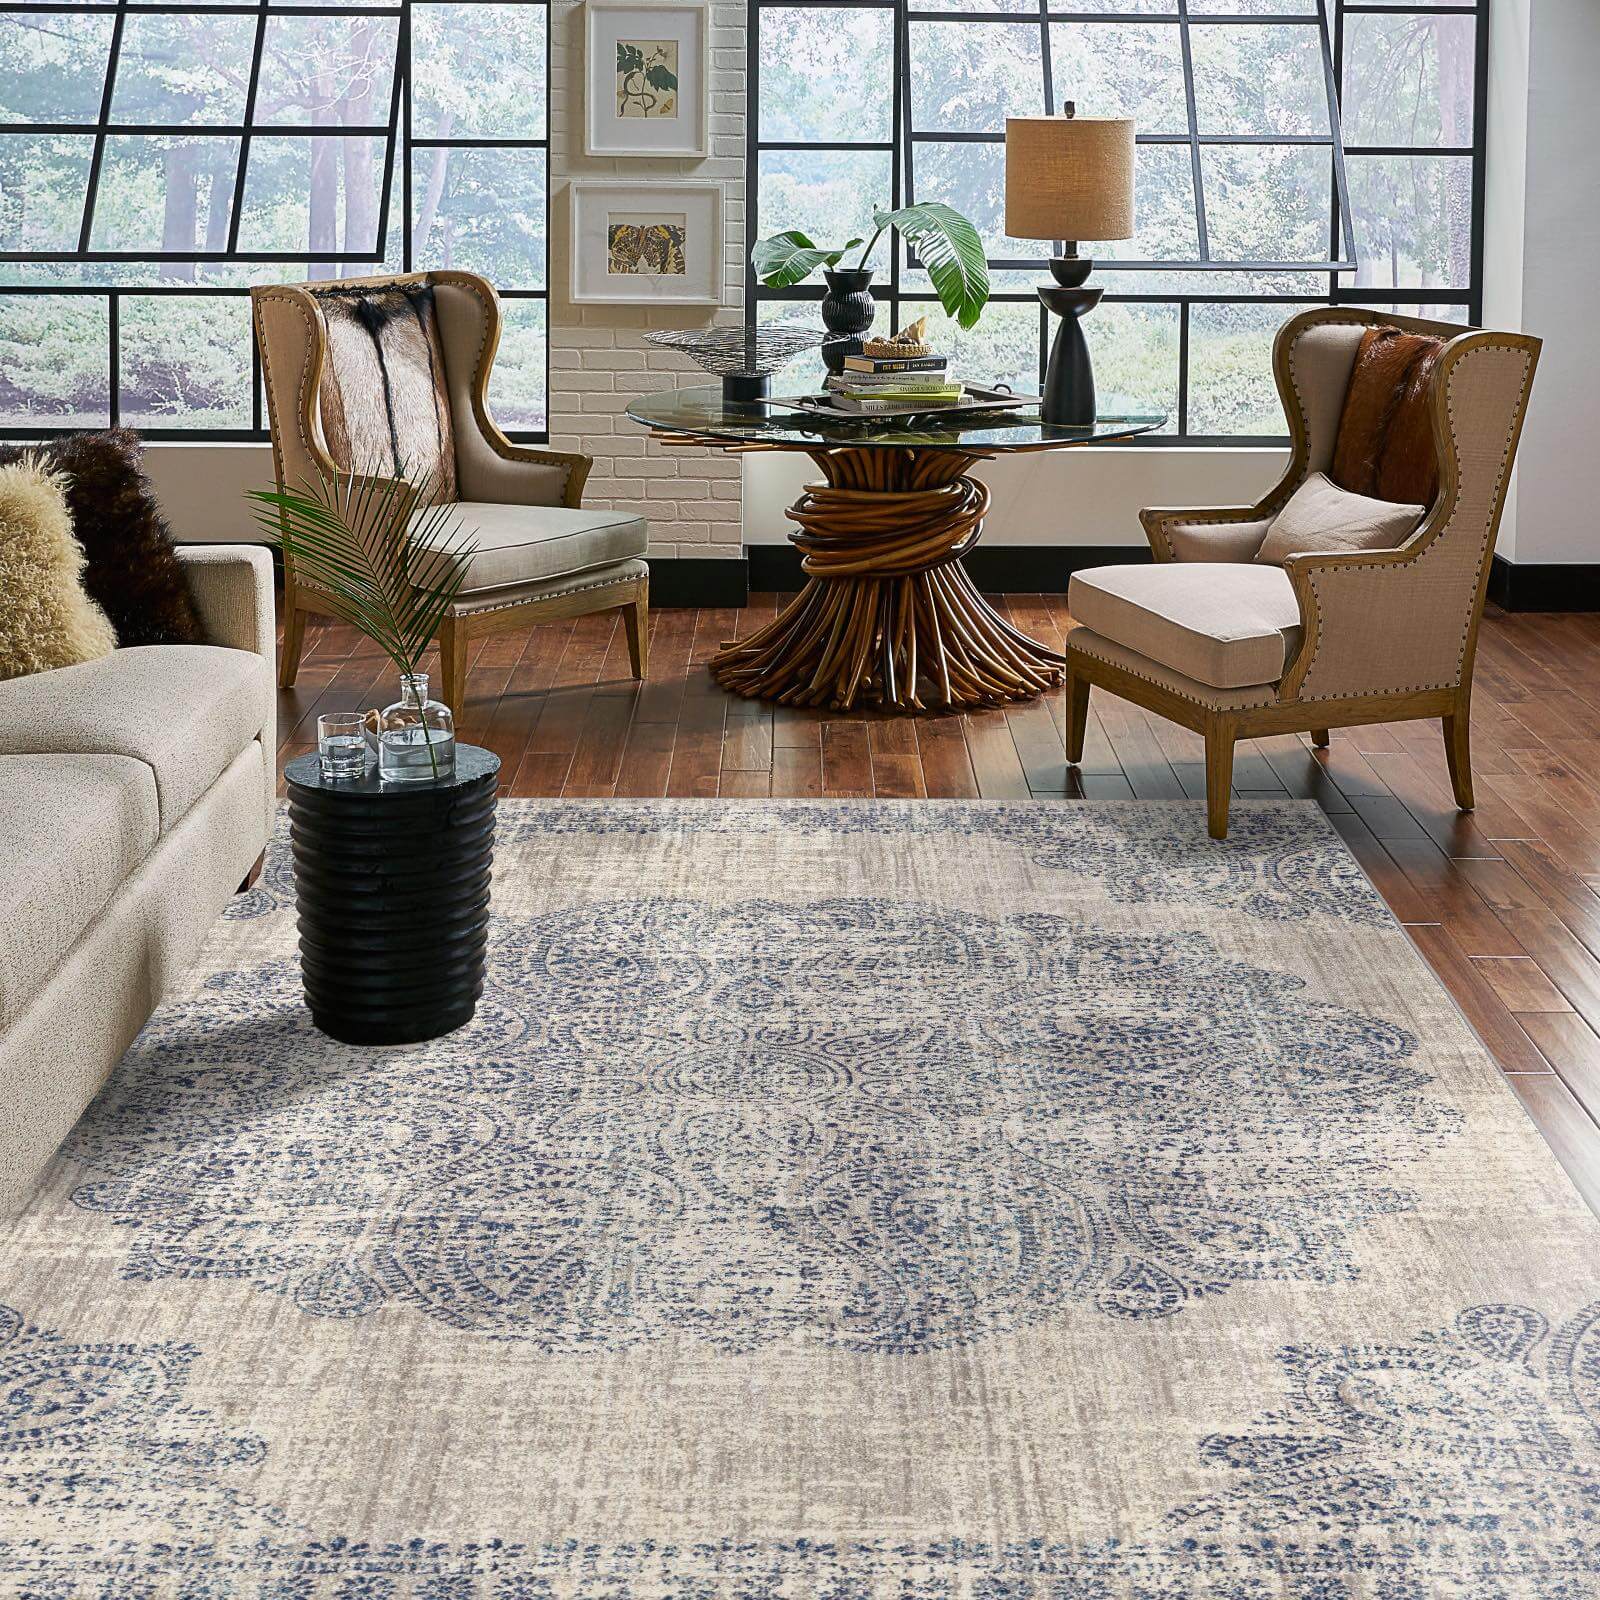 Area Rug in Living Room | Rockwall Floor and Paint